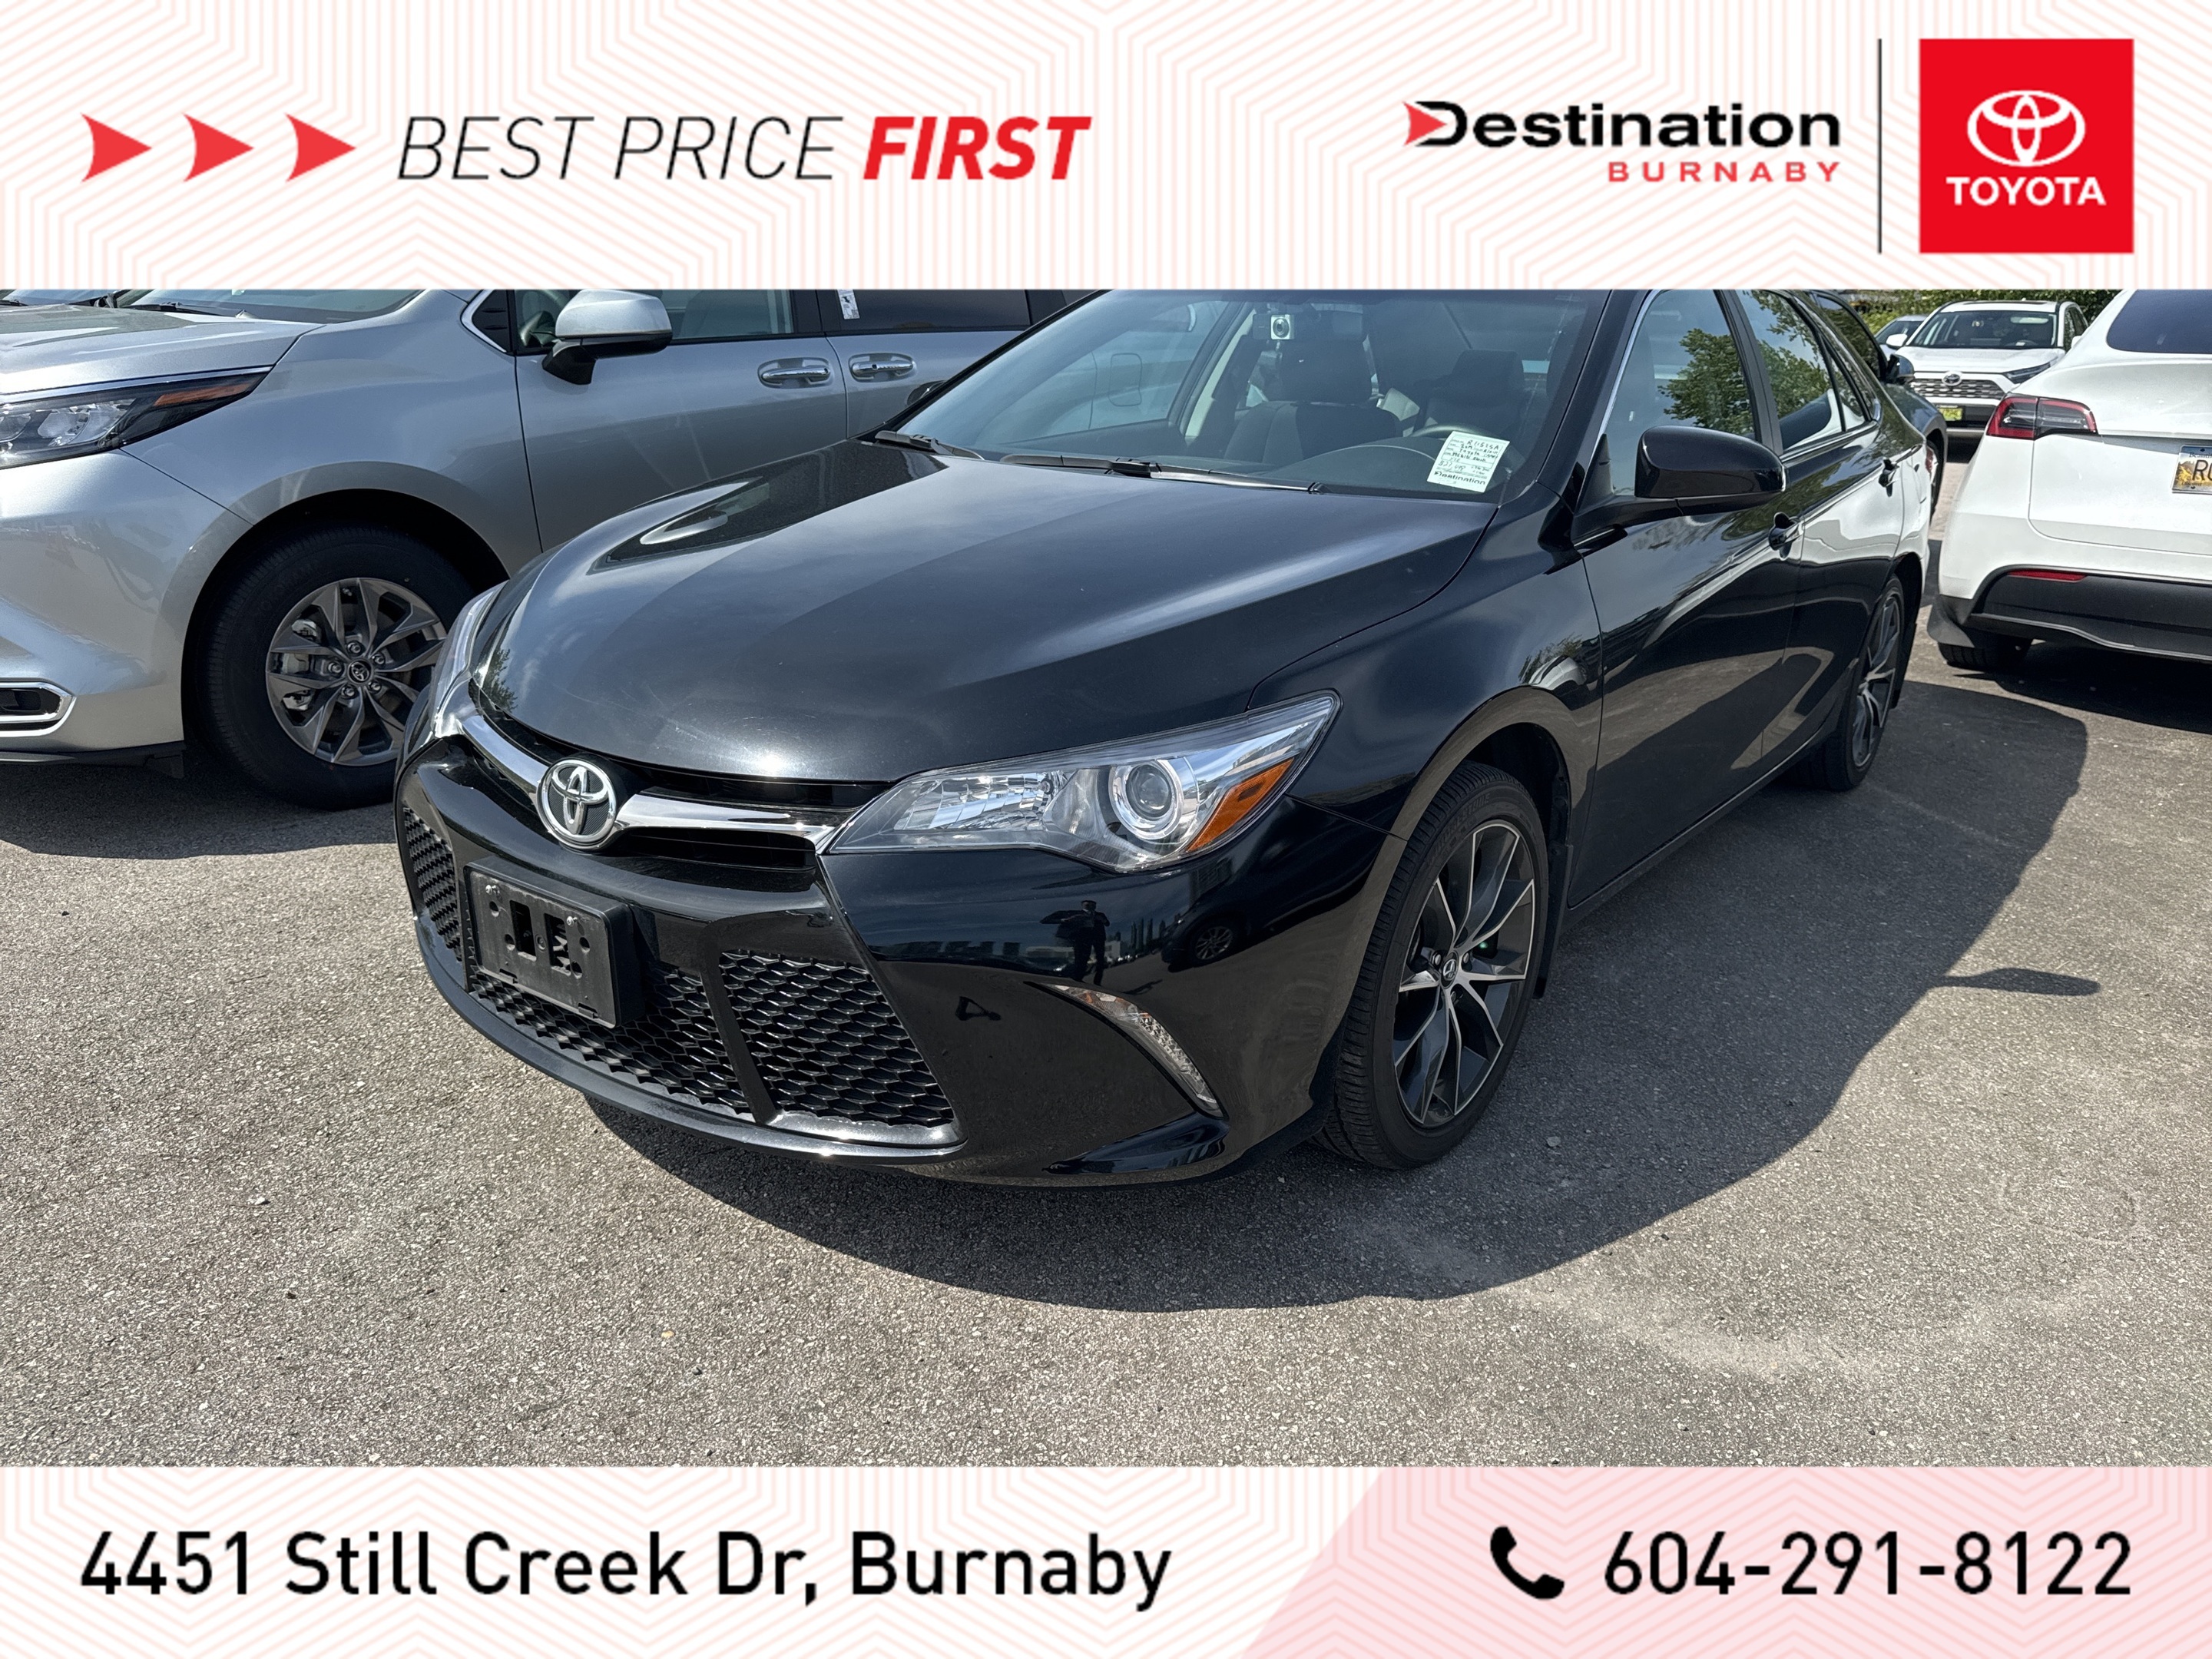 2017 Toyota Camry XSE Fully Equipped! Low KM! Toyota Certified!